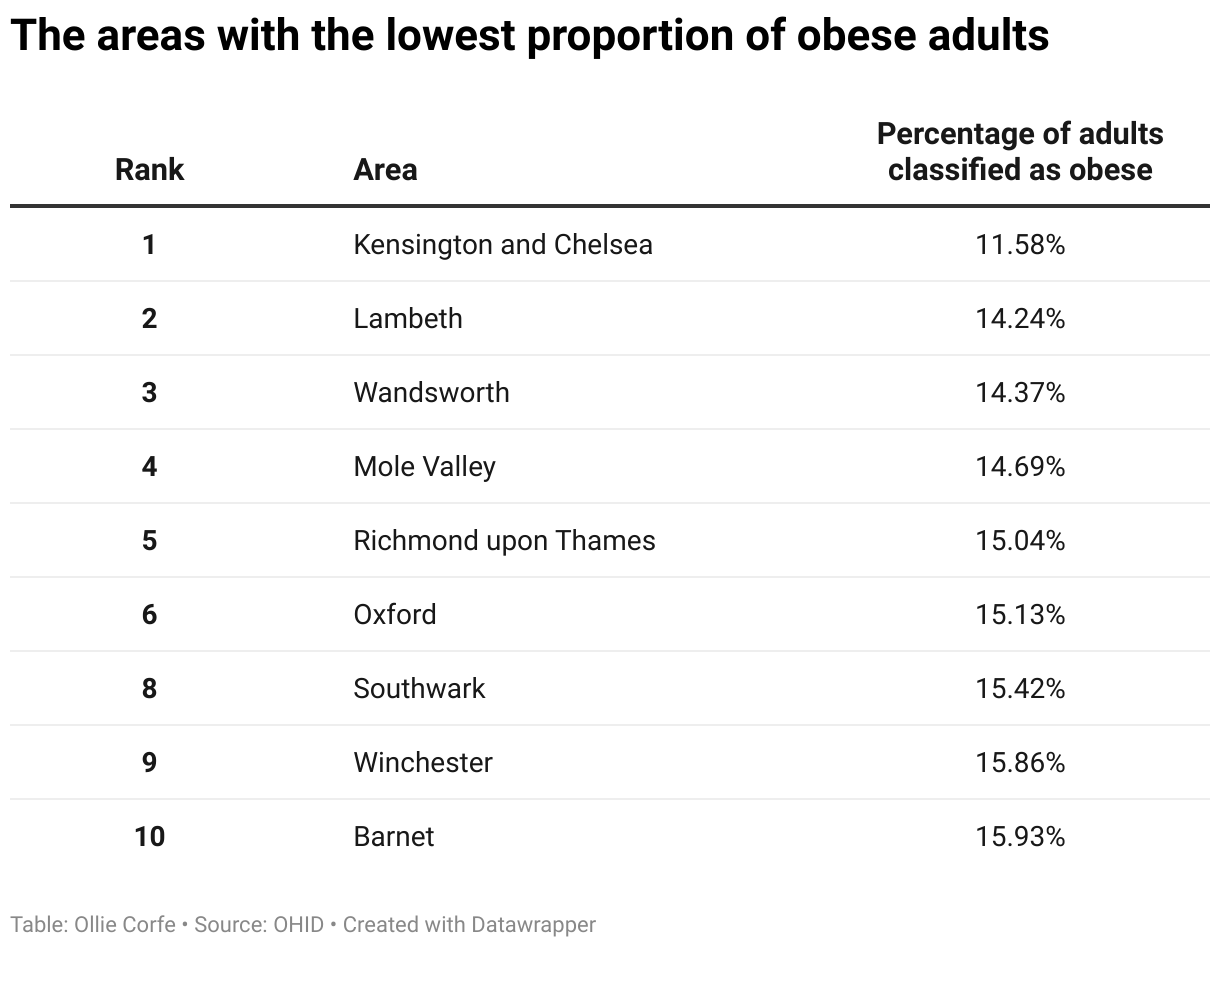 Table of least obese local authorities.